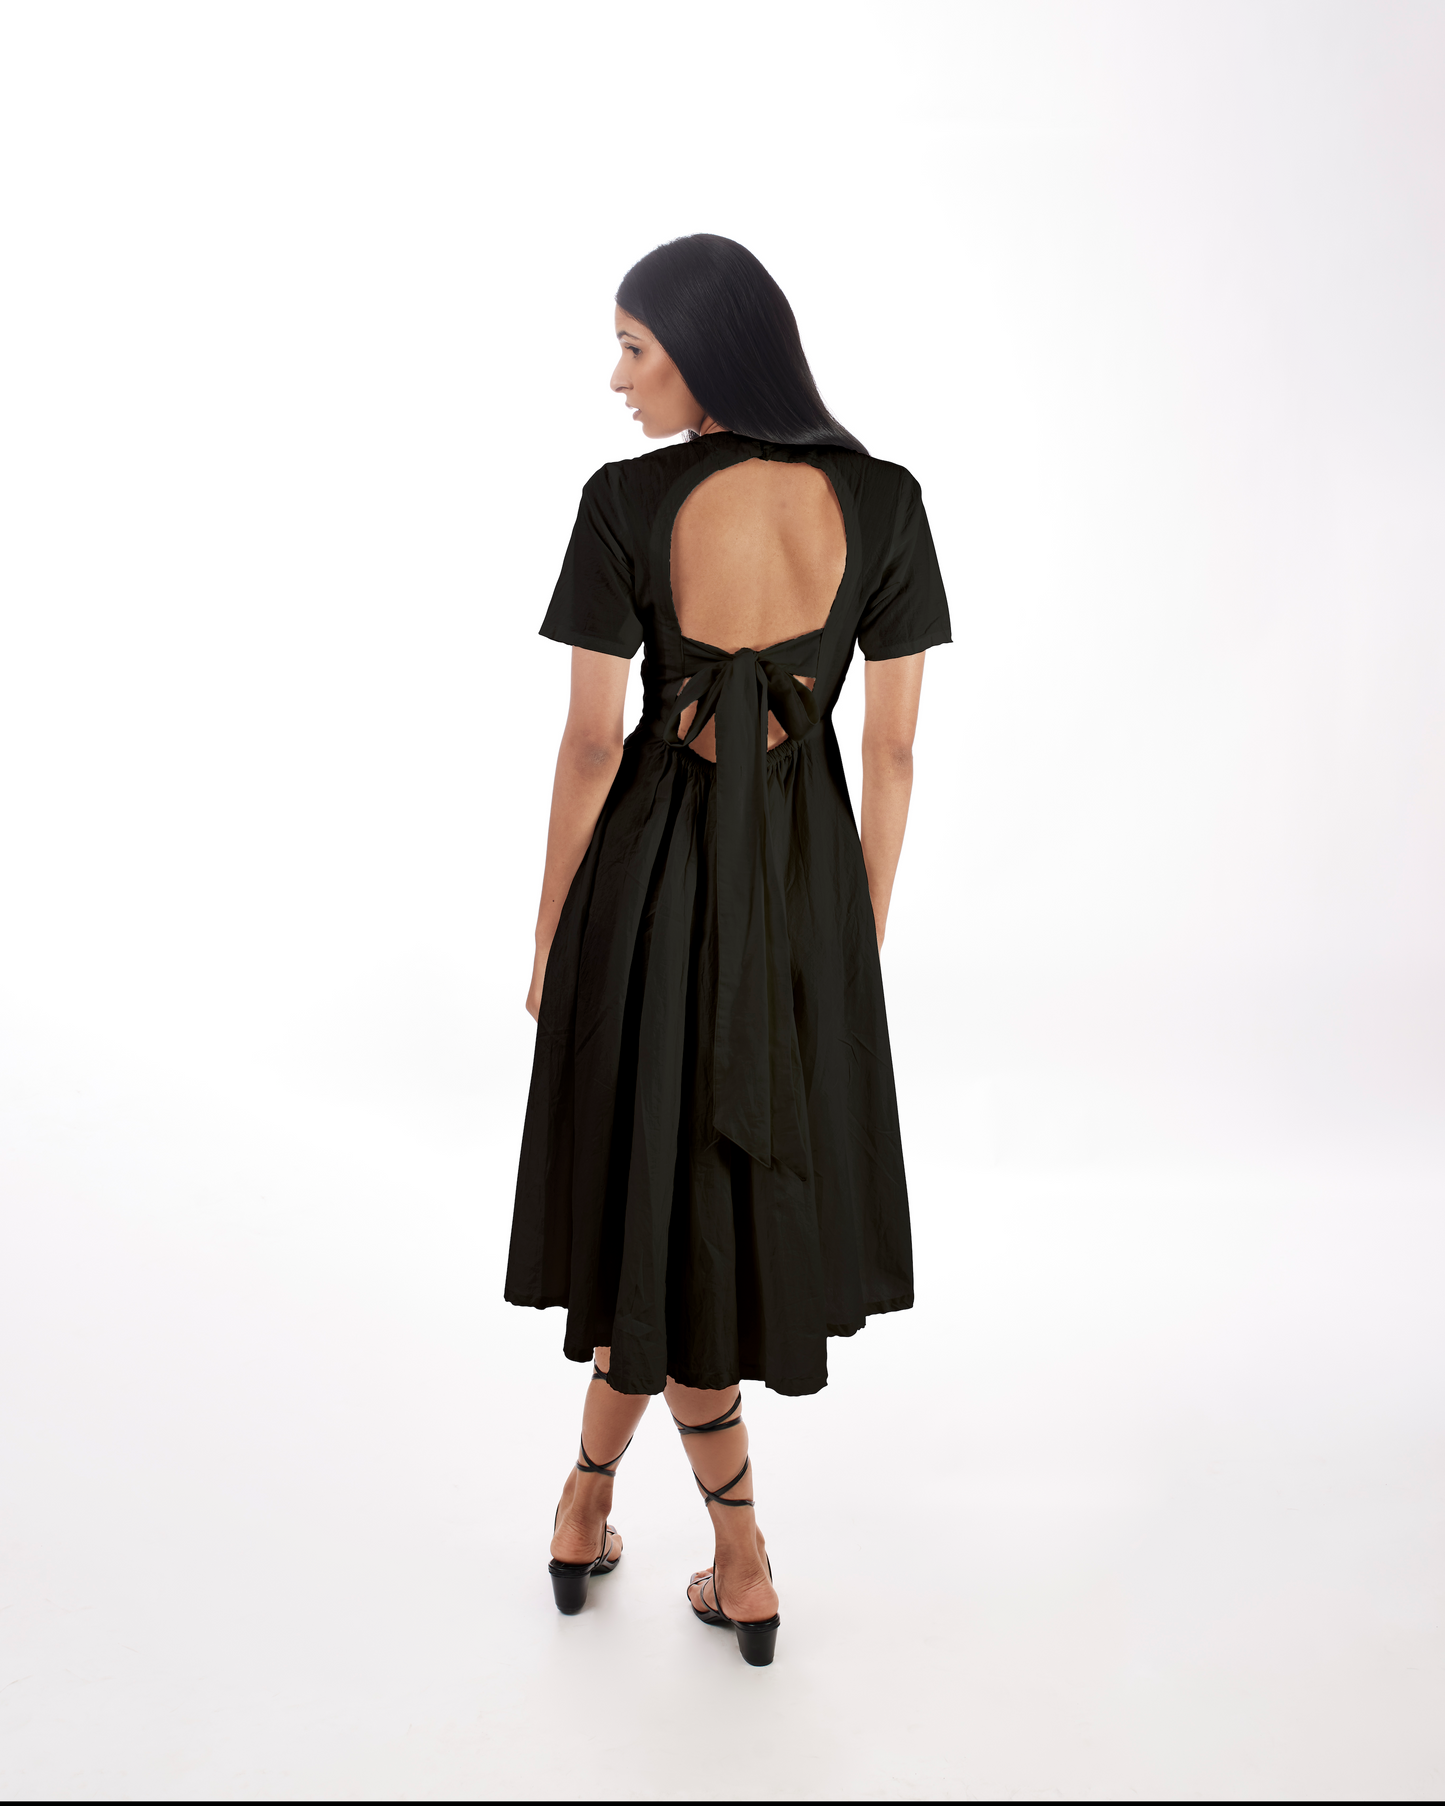 Black Backless Midi Dress by Kamakhyaa with 100% pure cotton, Black, FB ADS JUNE, Fitted At Waist, KKYSS, Midi Dresses, Naturally Made, Party Wear, Slim Fit, Solids, Summer Sutra, Womenswear at Kamakhyaa for sustainable fashion